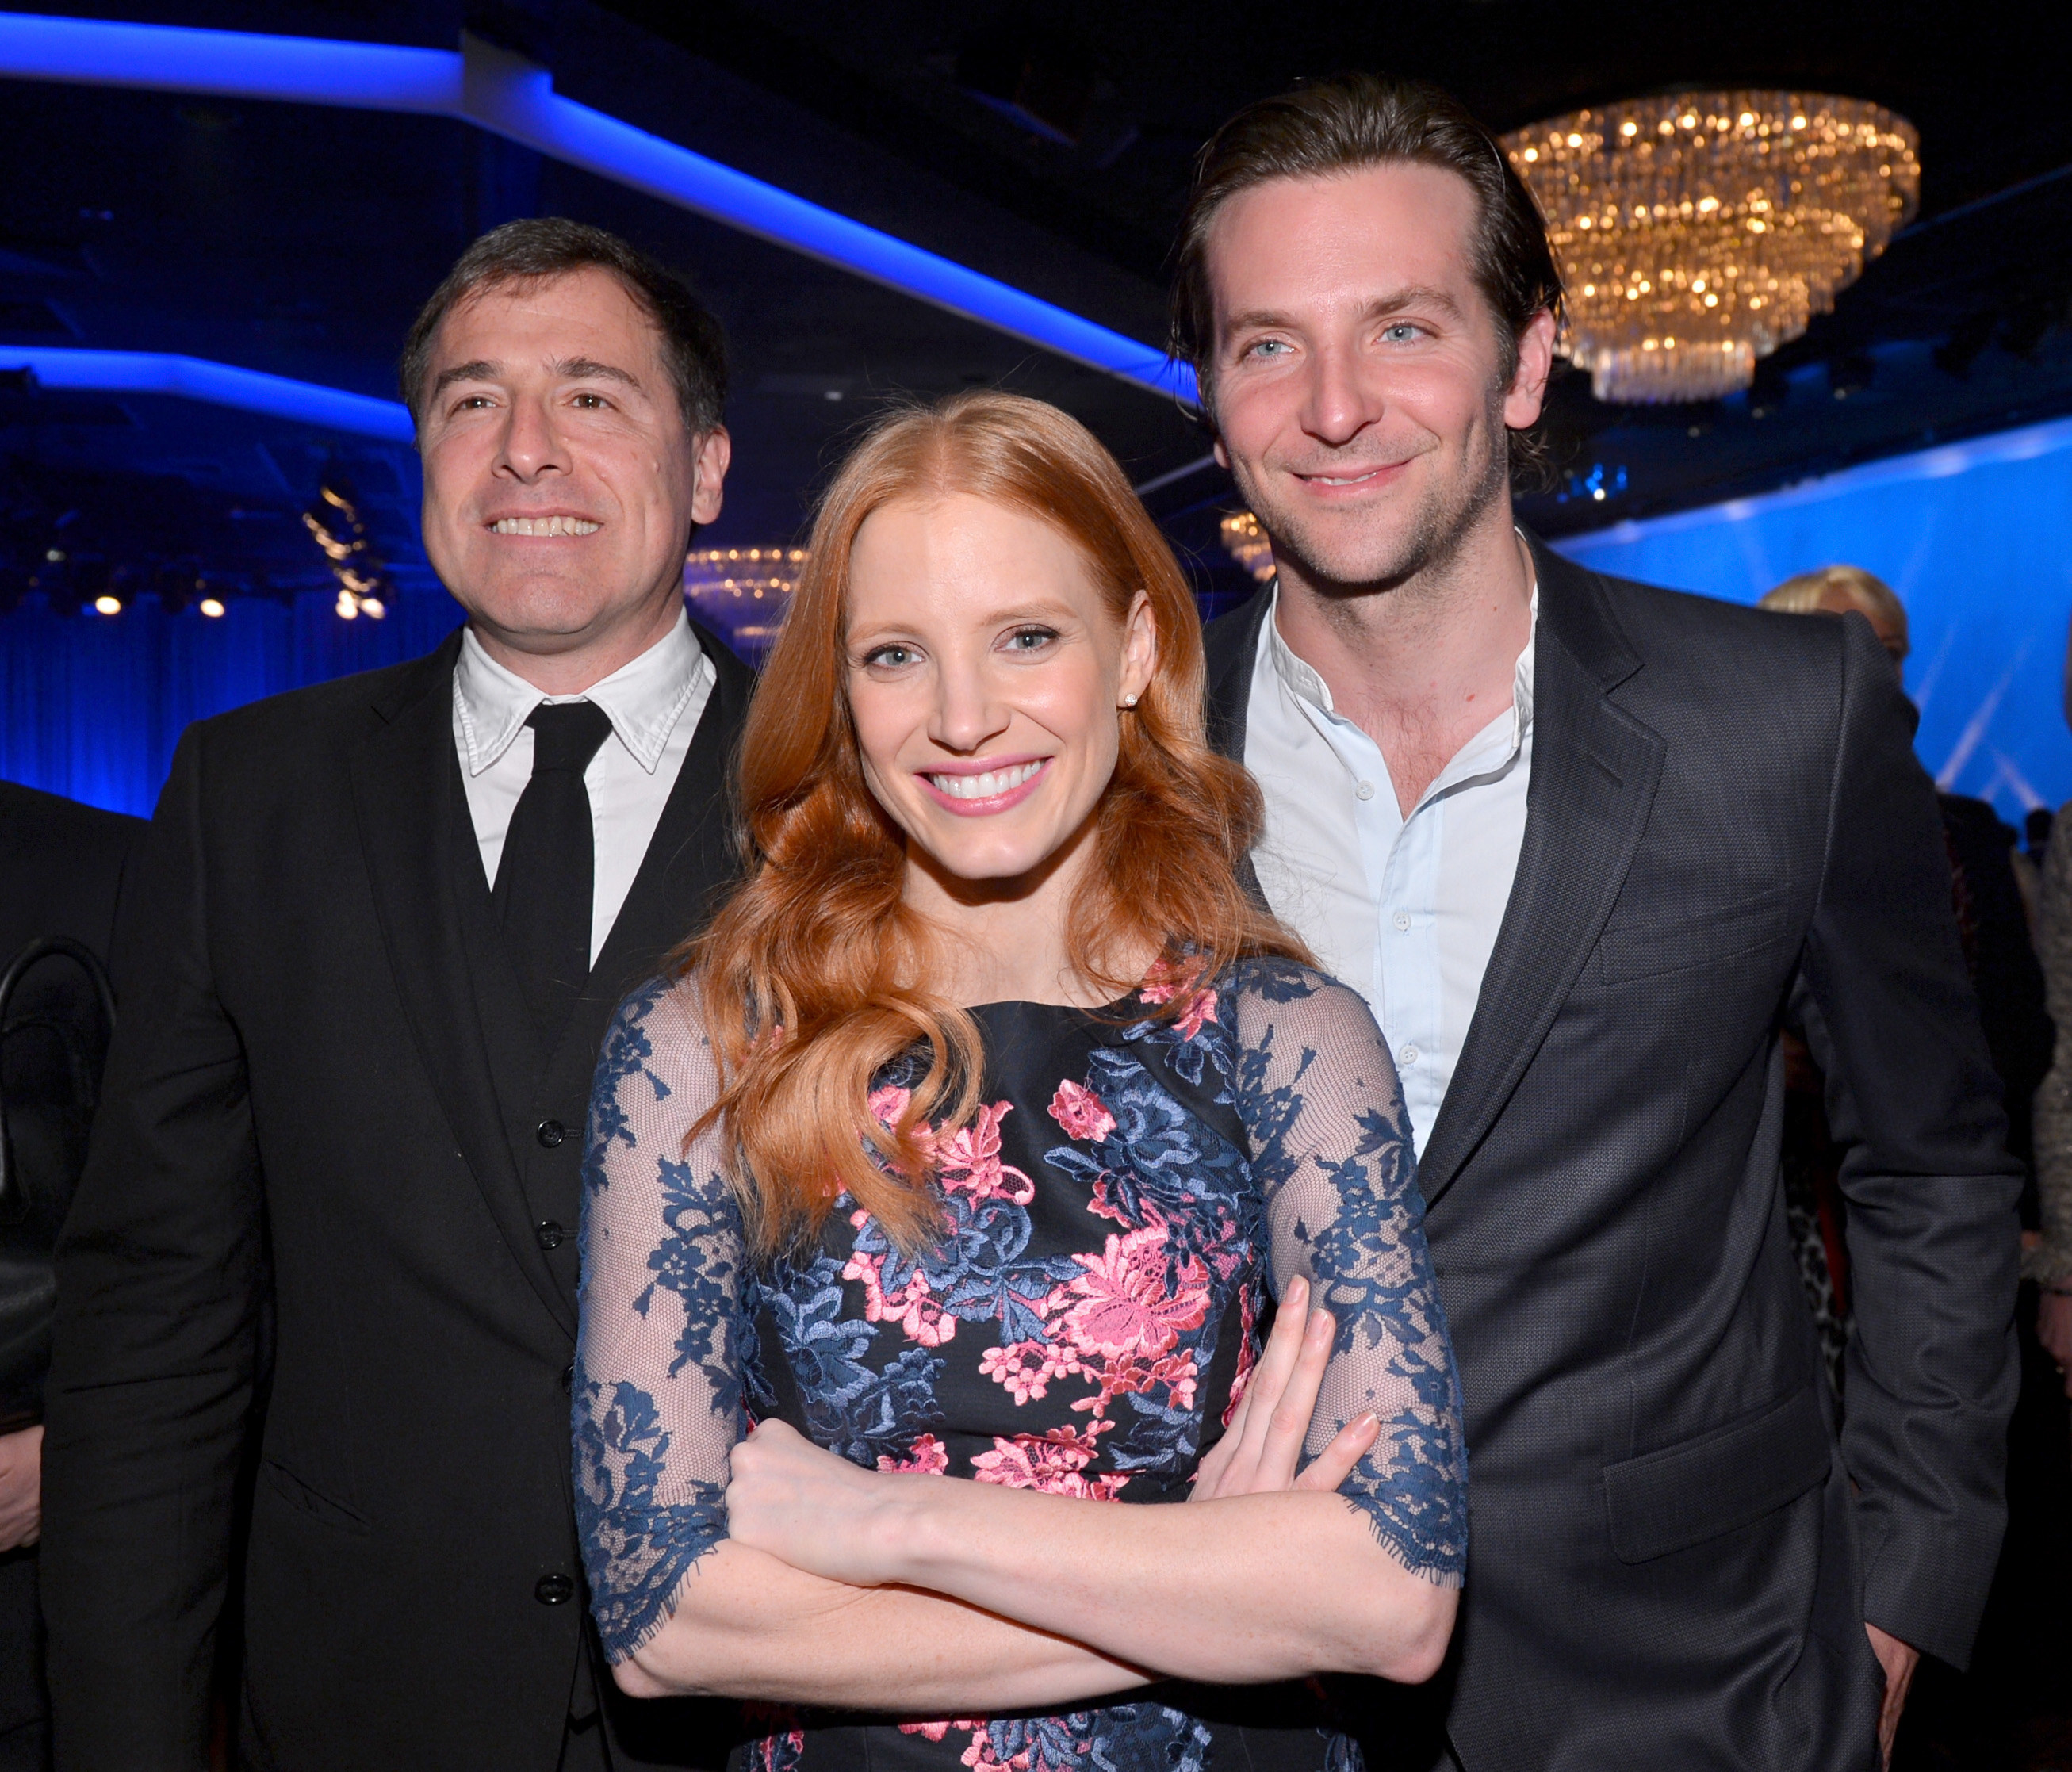 David O. Russell, Jessica Chastain, and Bradley Cooper at the Academy Awards Nominations Luncheon